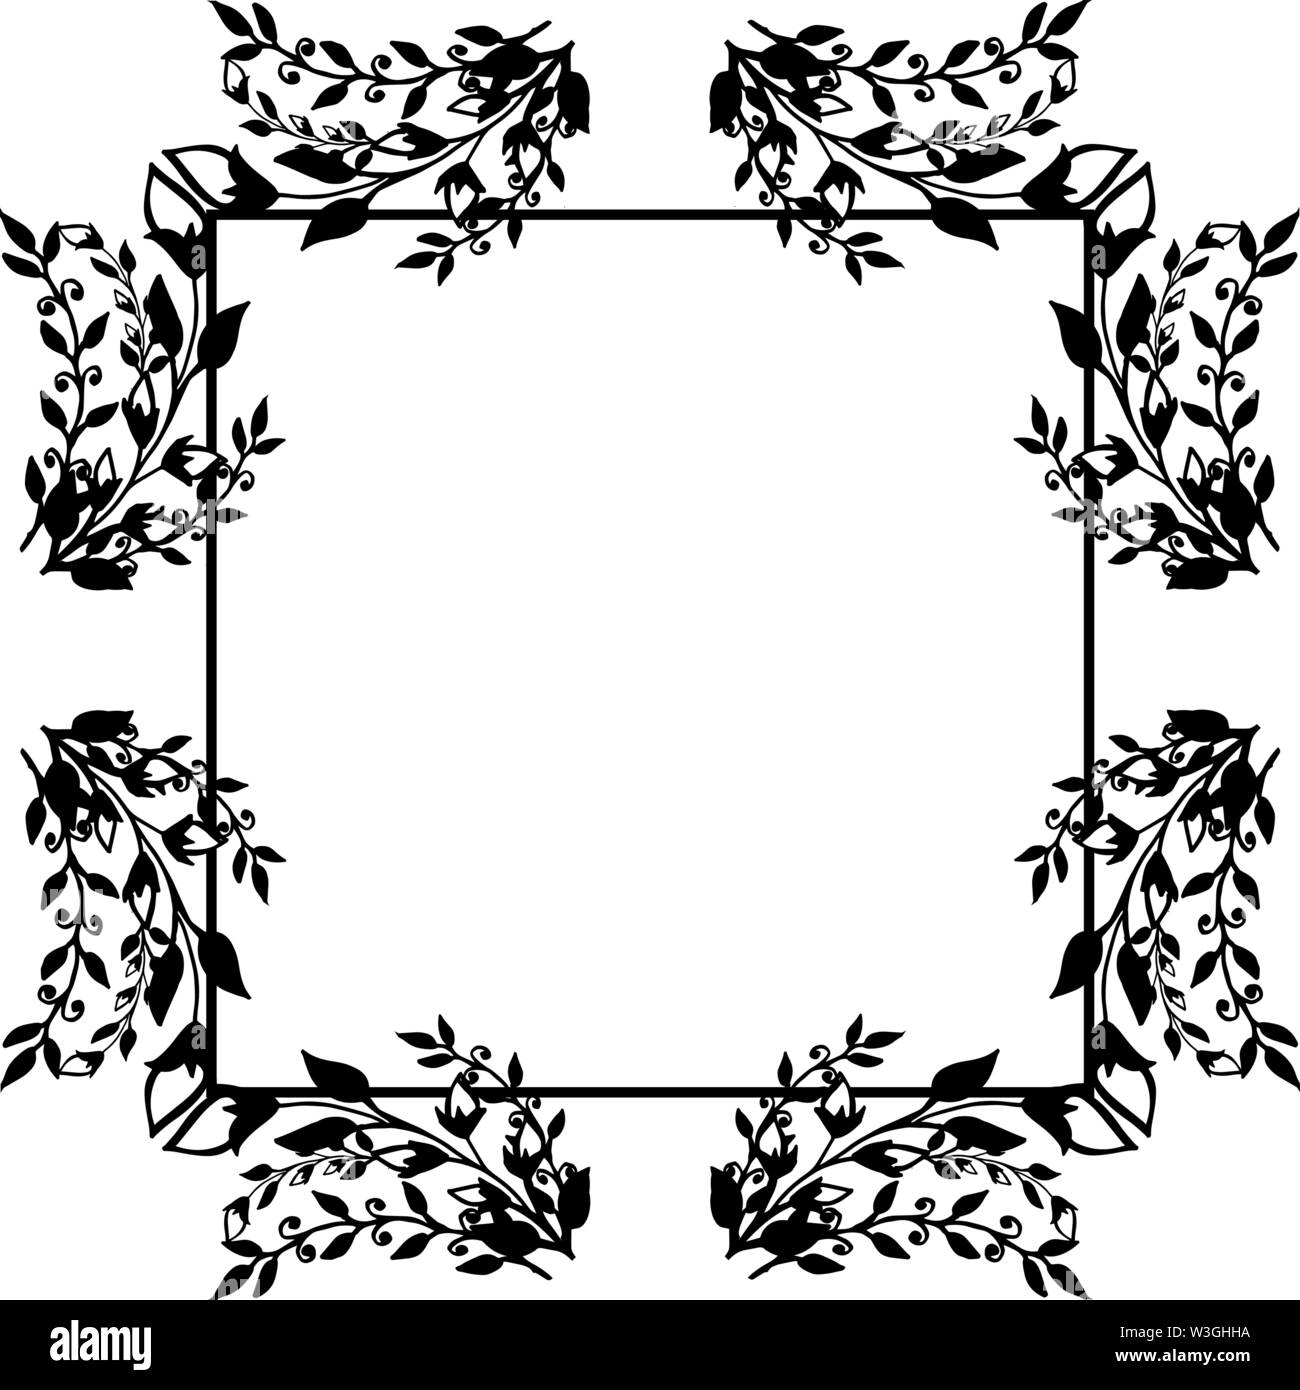 Decoration flower frame, isolated on white background. Vector ...